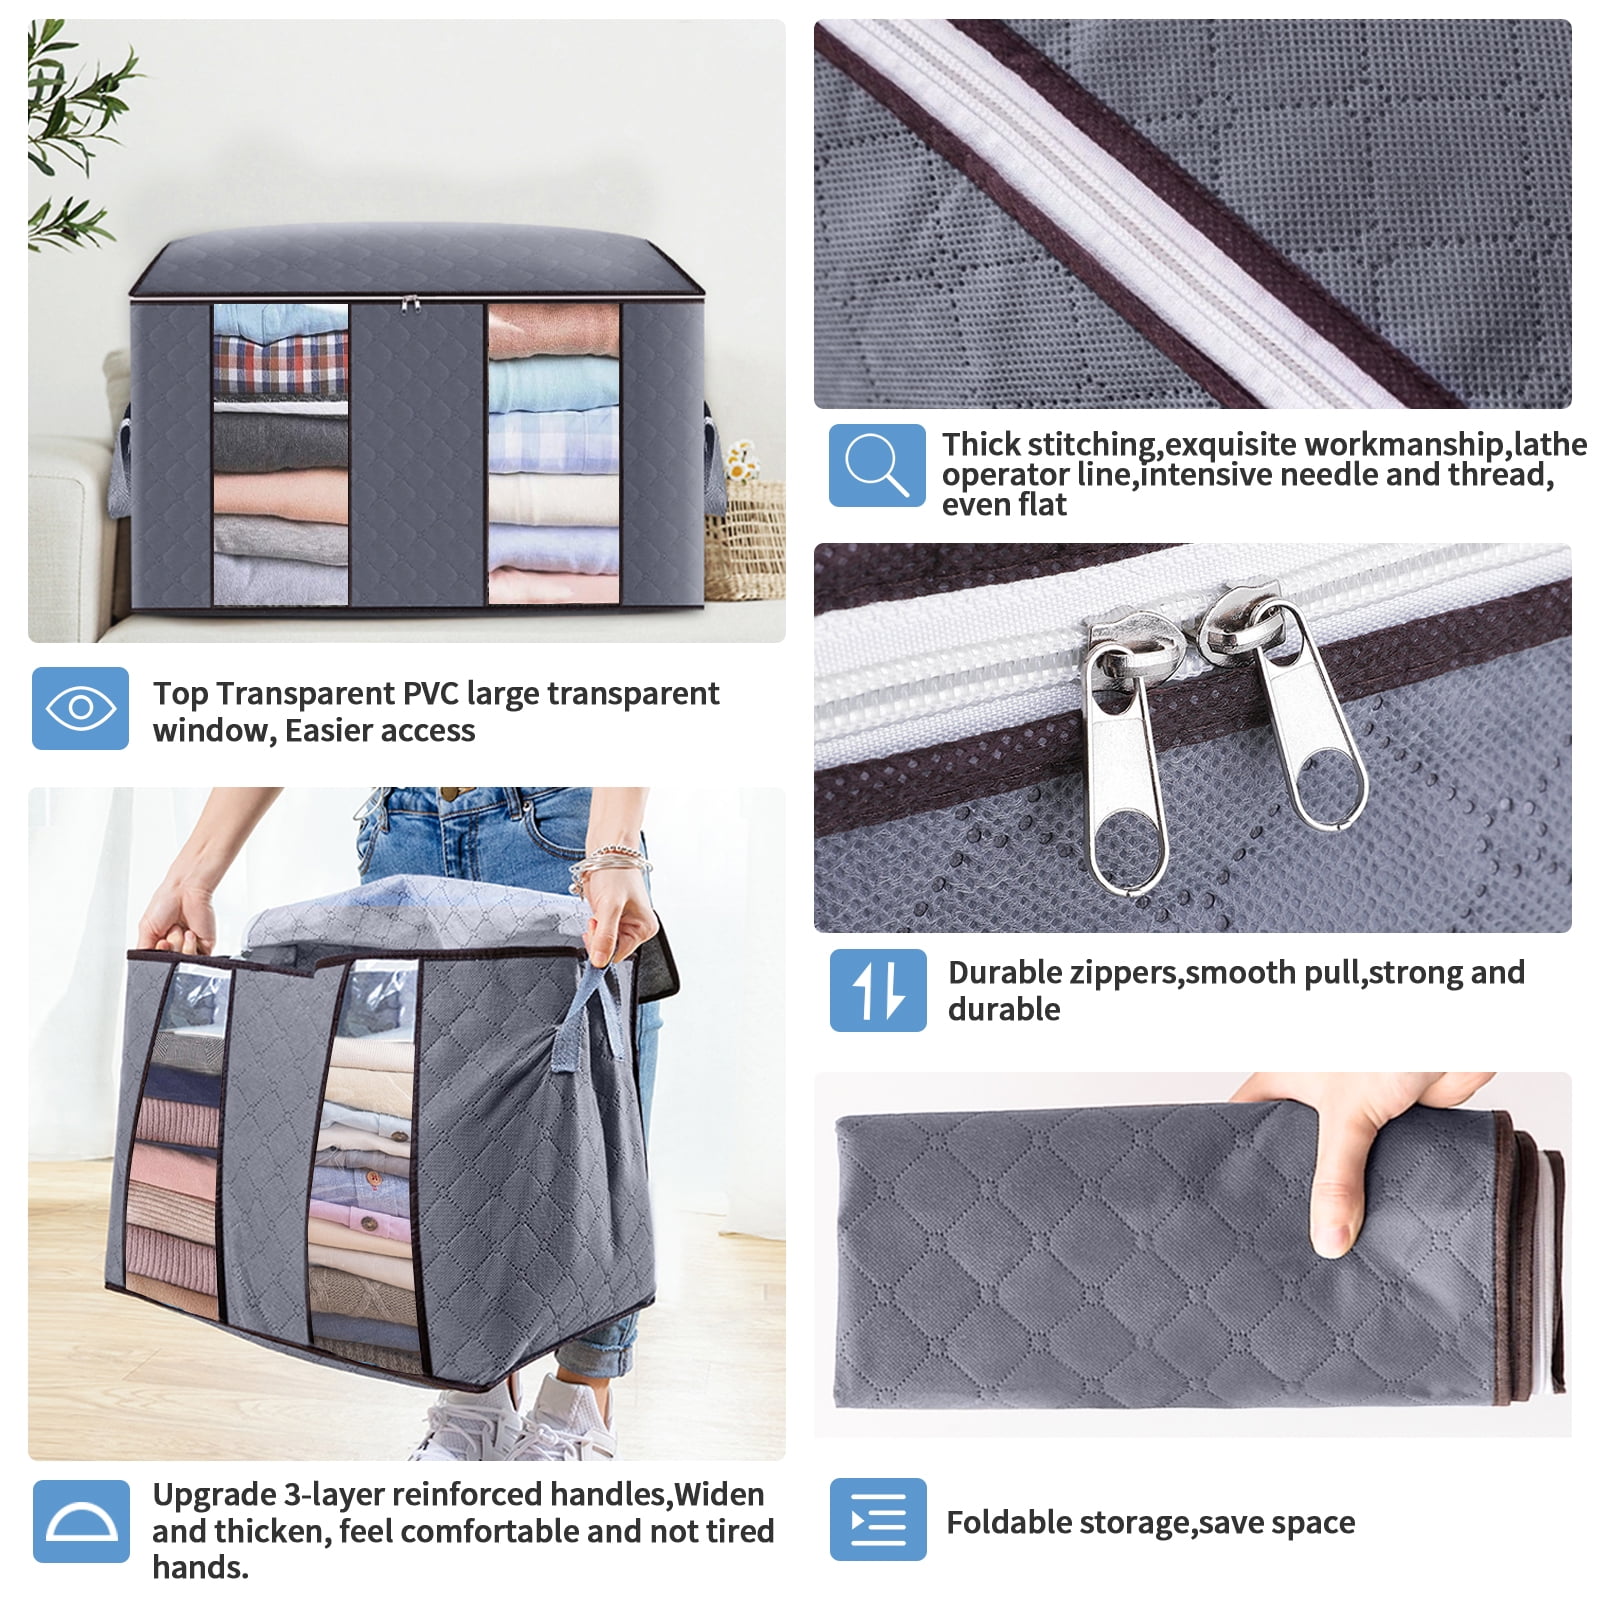 3-Pack Over-Sized Large Clothes Storage Bag Organizer - Grey, 9.5 Gal